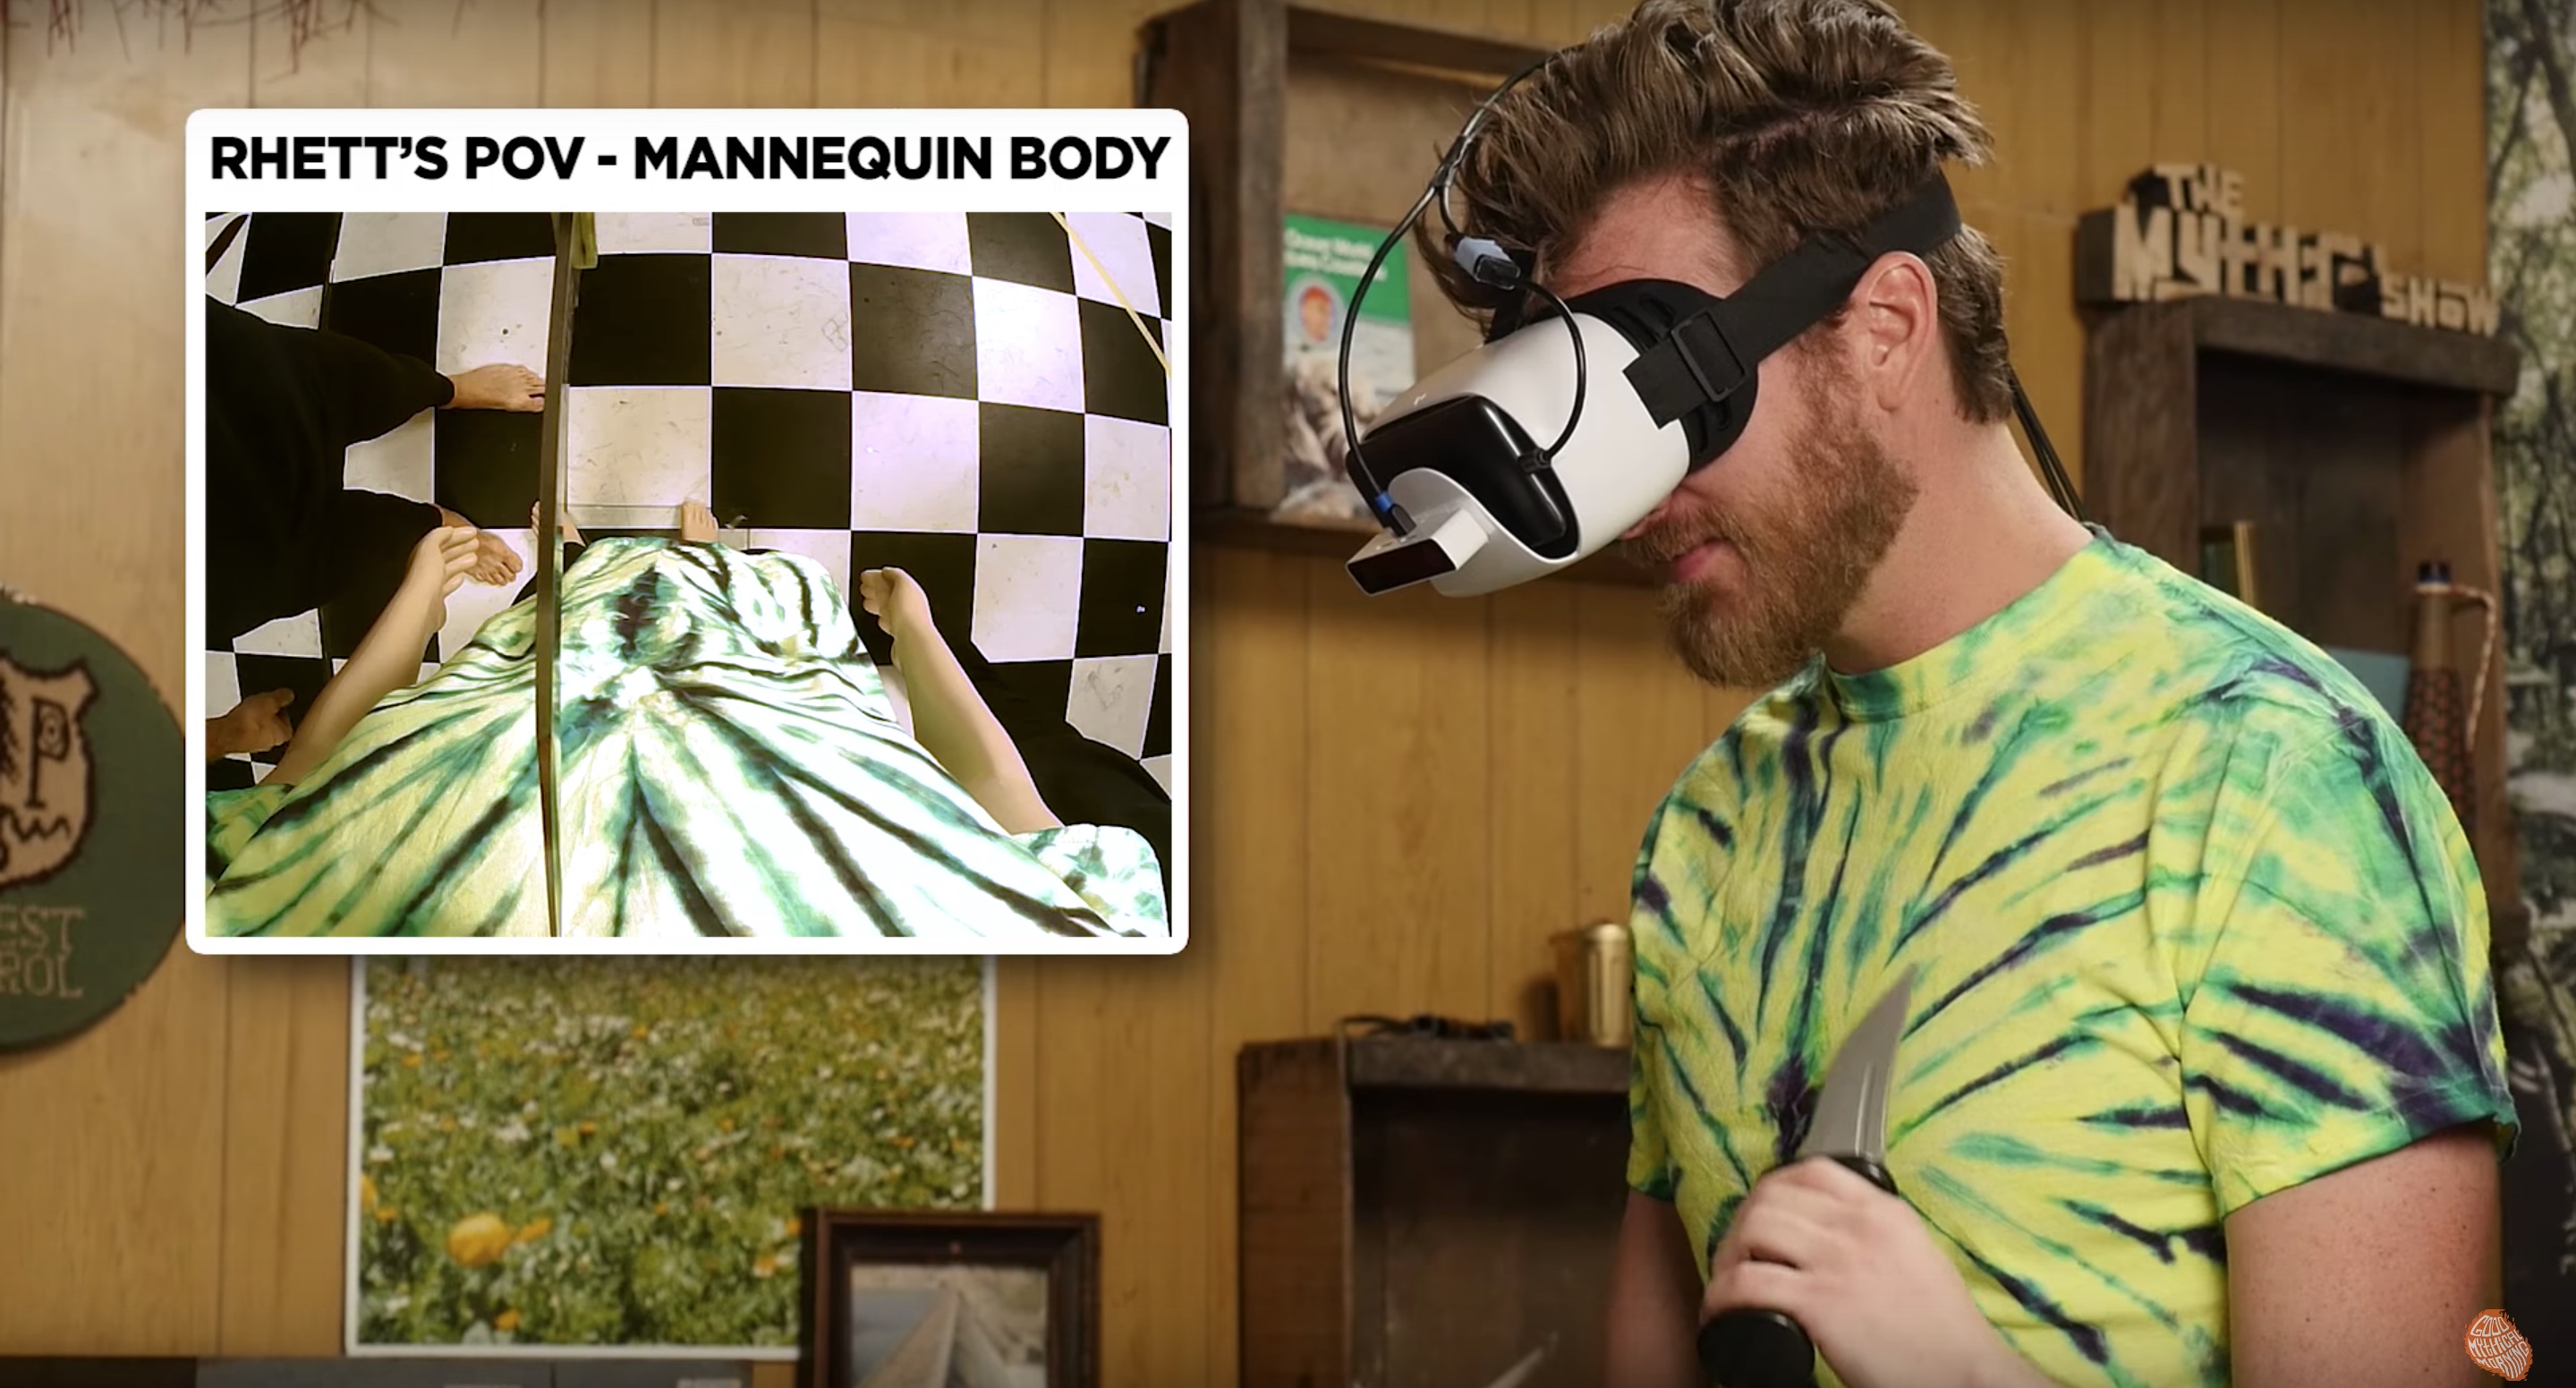 YouTubers Take 'The Mannequin Challenge' to a New Level With VR